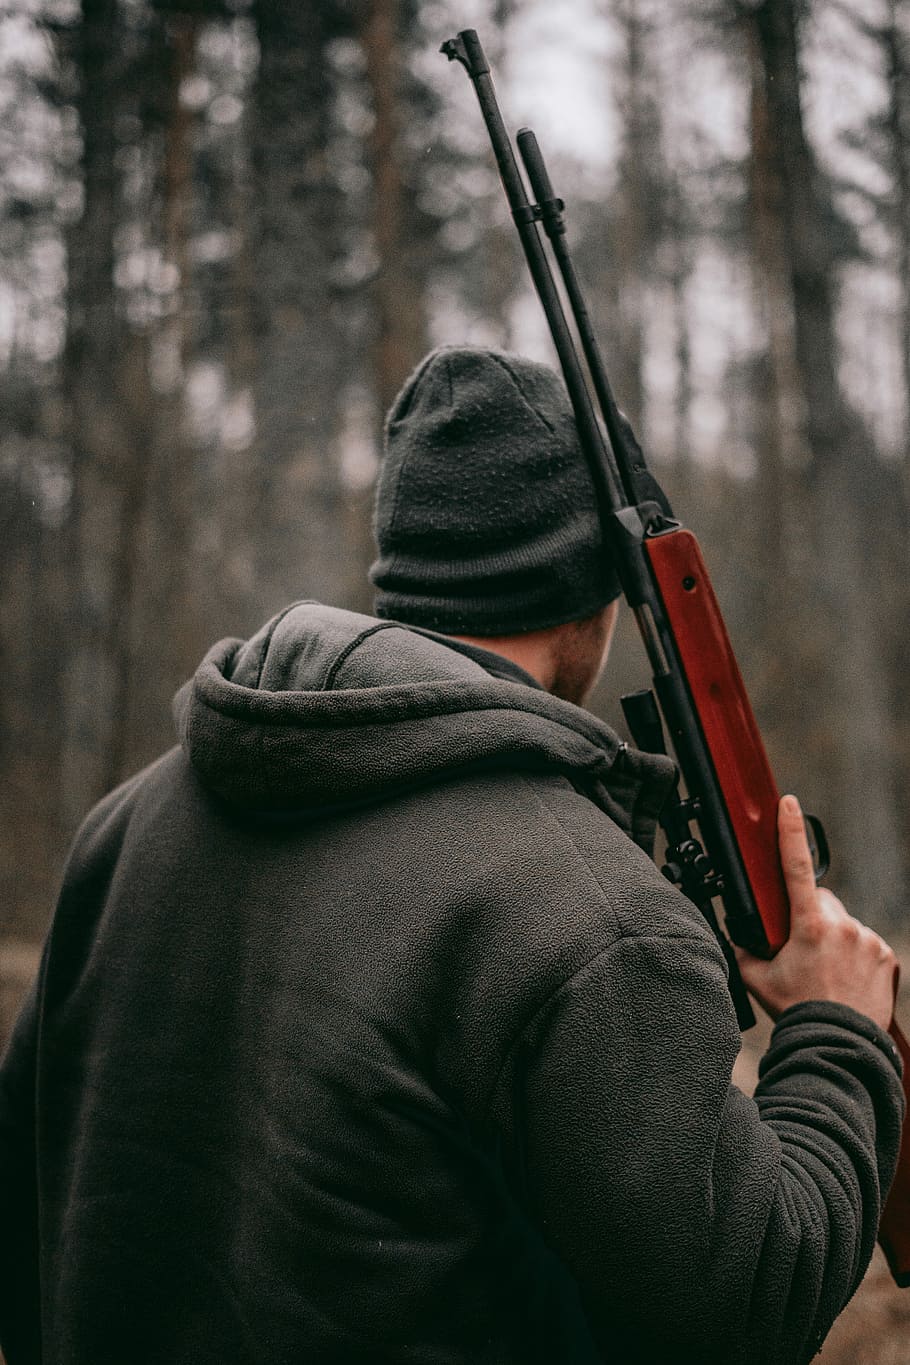 man holding brown and black sniper rifle in shallow focus photography, man holding hunting rifle